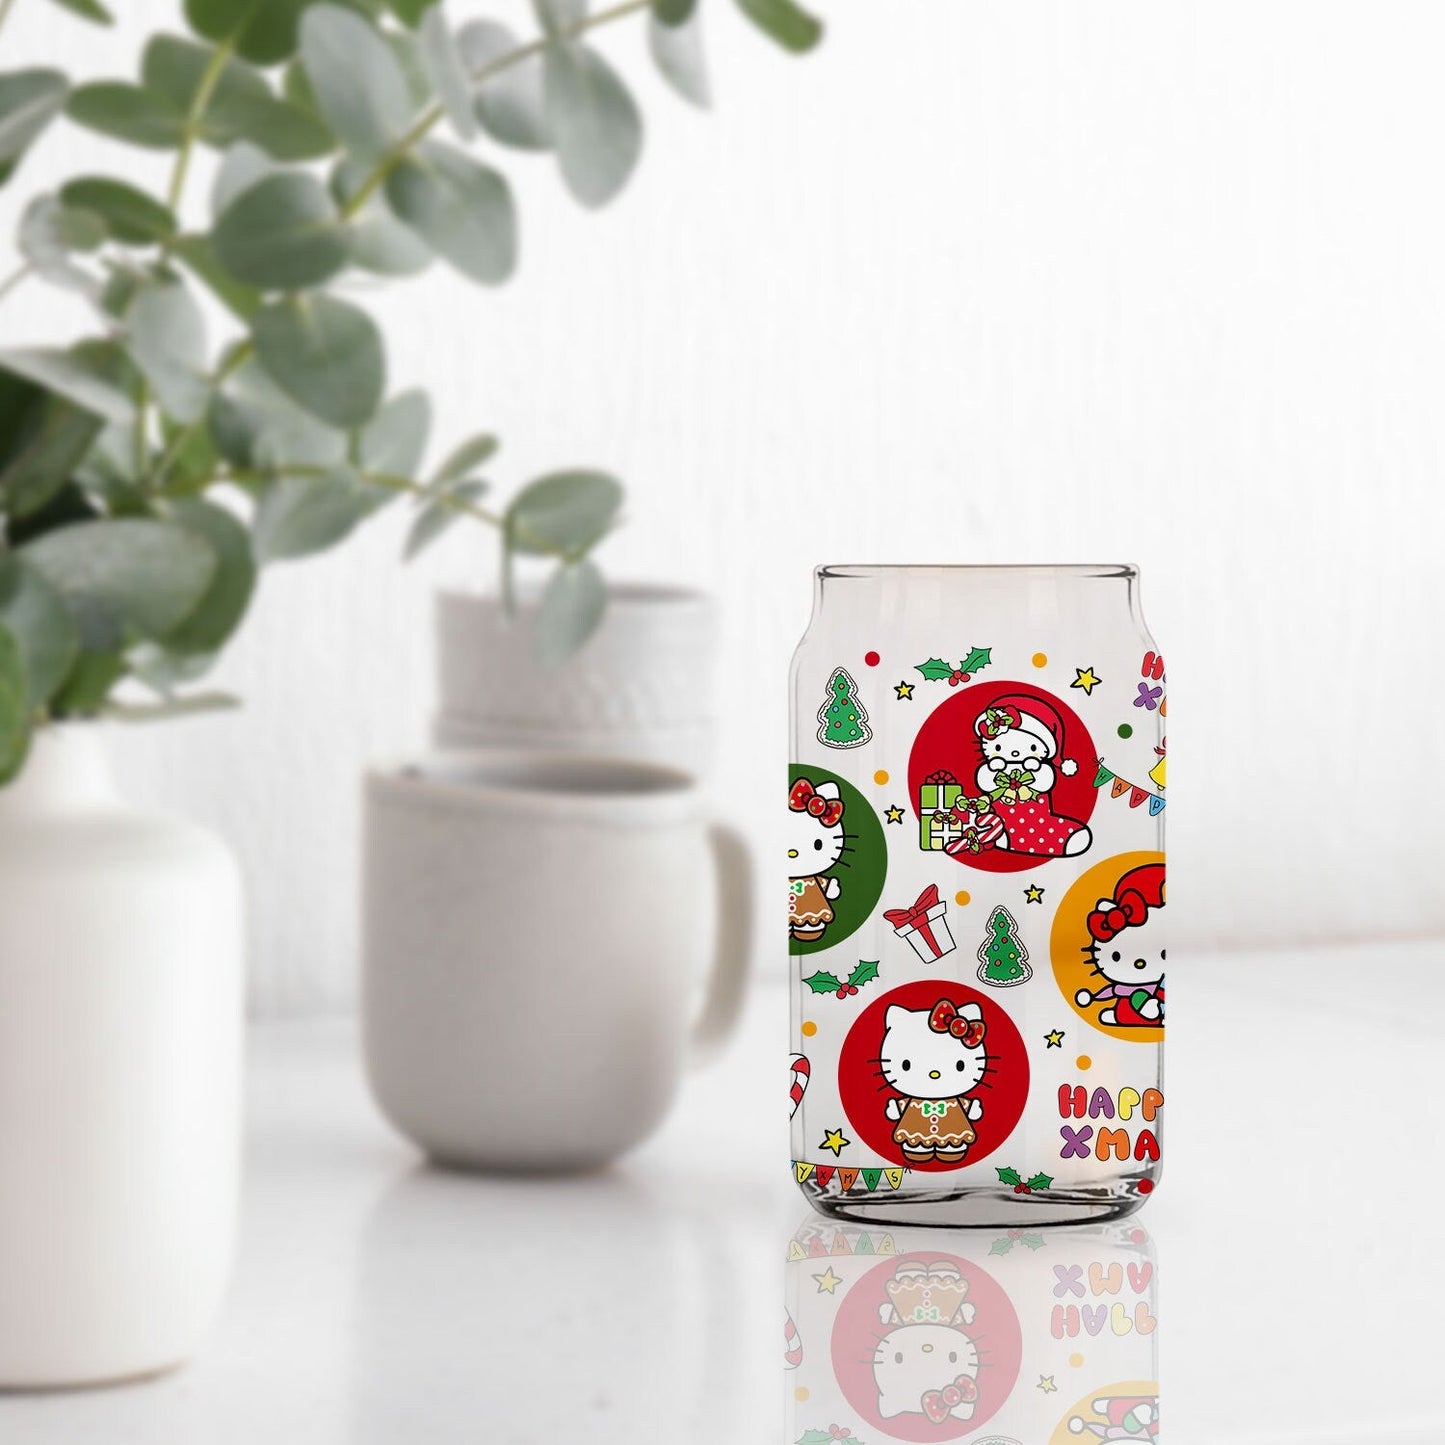 Kawai Kity and Friends Libbey Wrap png, Glass can Wrap Kawai Png, Instant Download PNG File Retro Floral Libbey Glass Wrap - VartDigitals